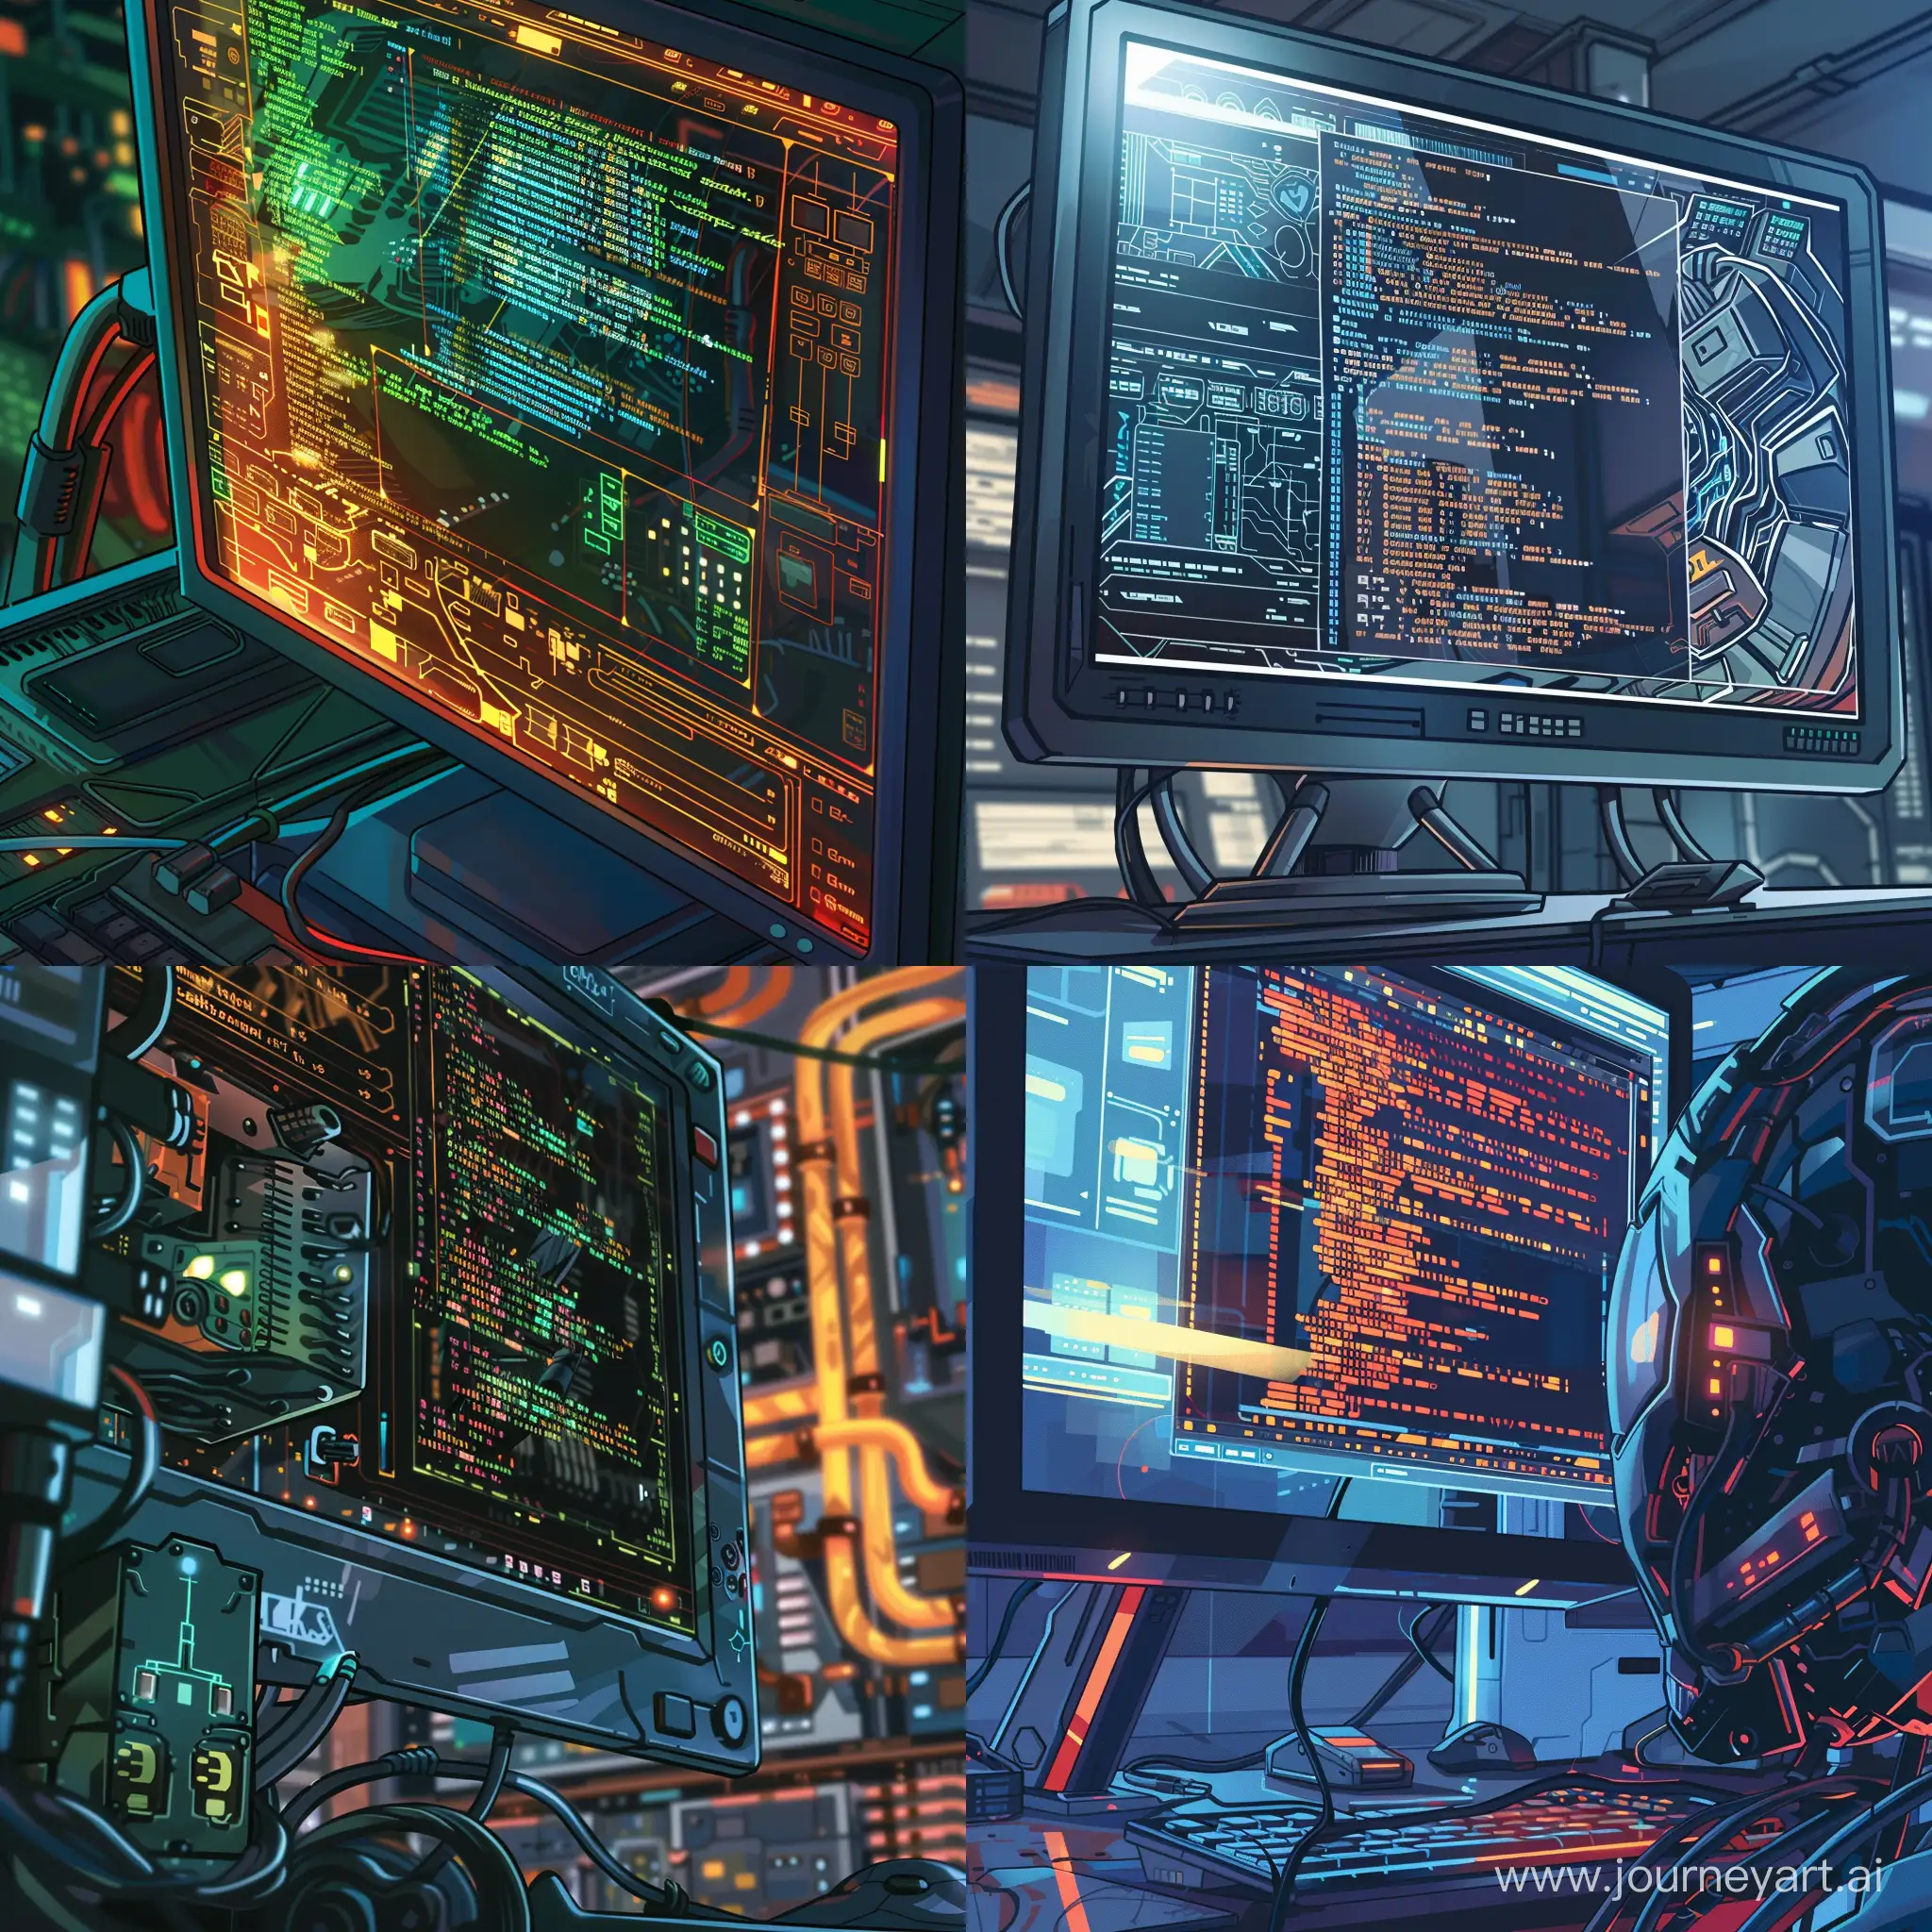 Closeup of a computer monitor in a marvel cartoon style, showing computer hardware that is made purely of software code in a photorealistic style. Software defined everything. Virtualization. Experiment with color theme, and make the picture tidy and sleek. 